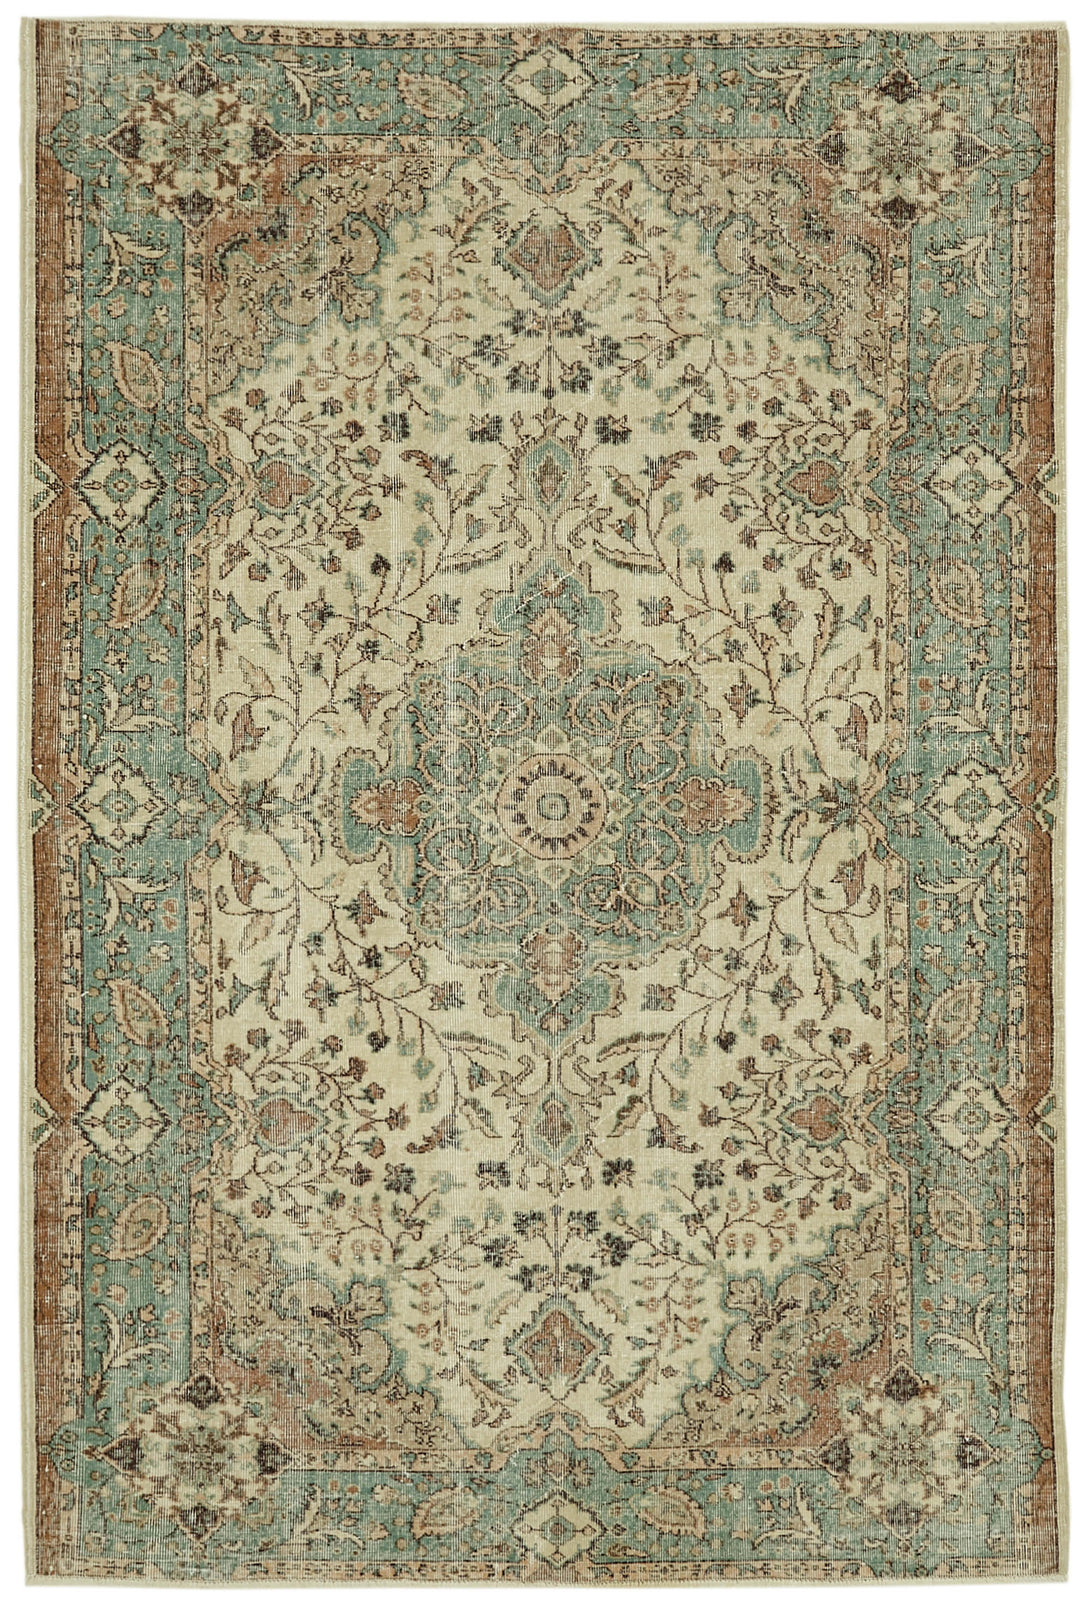 Handmade White Wash Area Rug > Design# OL-AC-41708 > Size: 6'-7" x 9'-6", Carpet Culture Rugs, Handmade Rugs, NYC Rugs, New Rugs, Shop Rugs, Rug Store, Outlet Rugs, SoHo Rugs, Rugs in USA